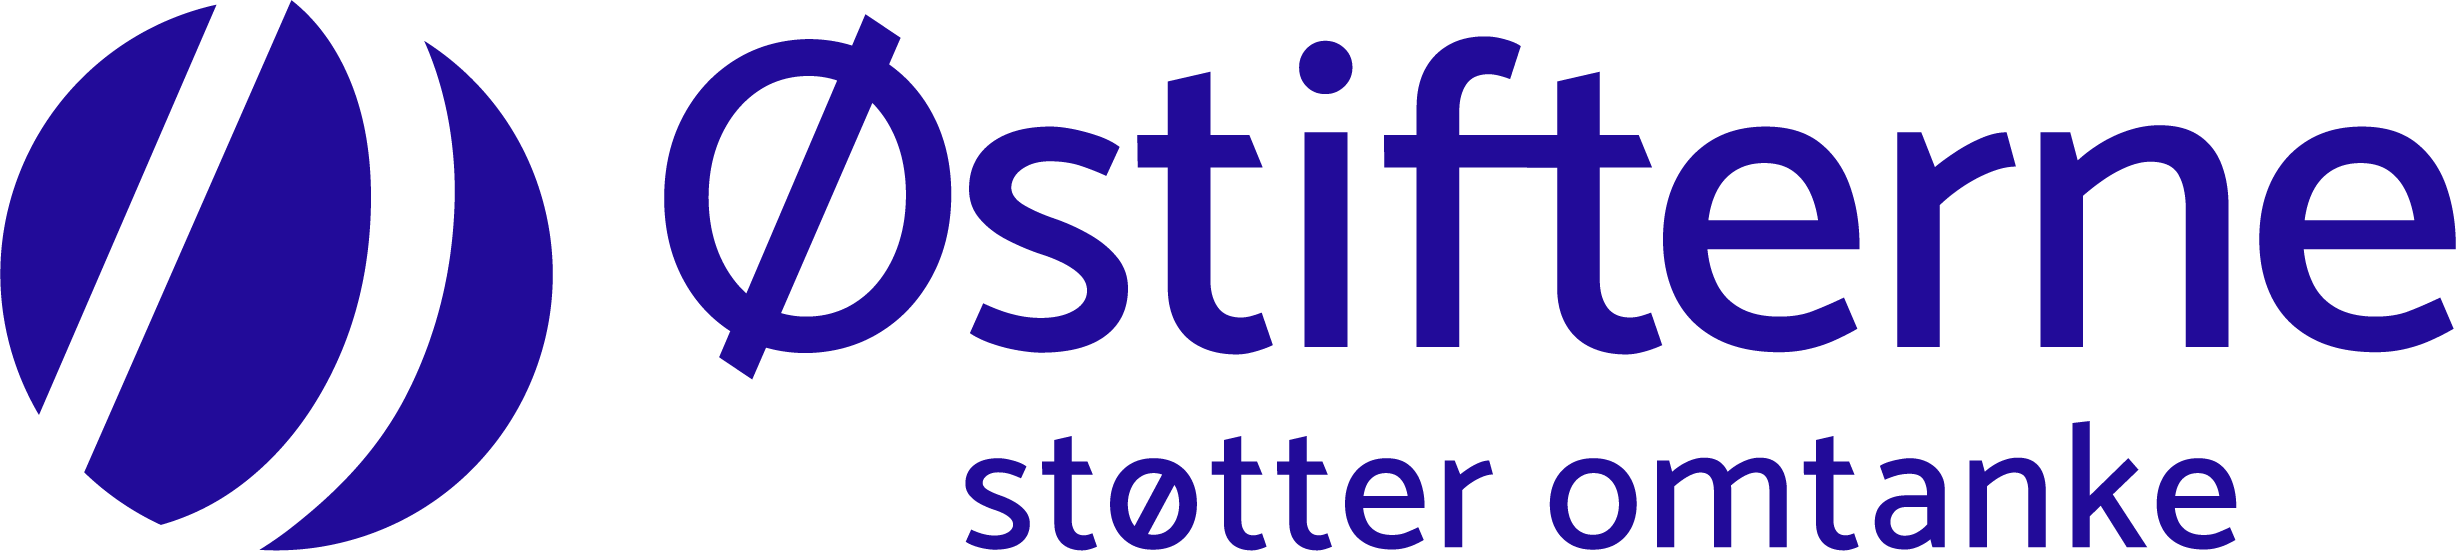 Oestifterne_Logo Payoff_1 linje_RGB.png